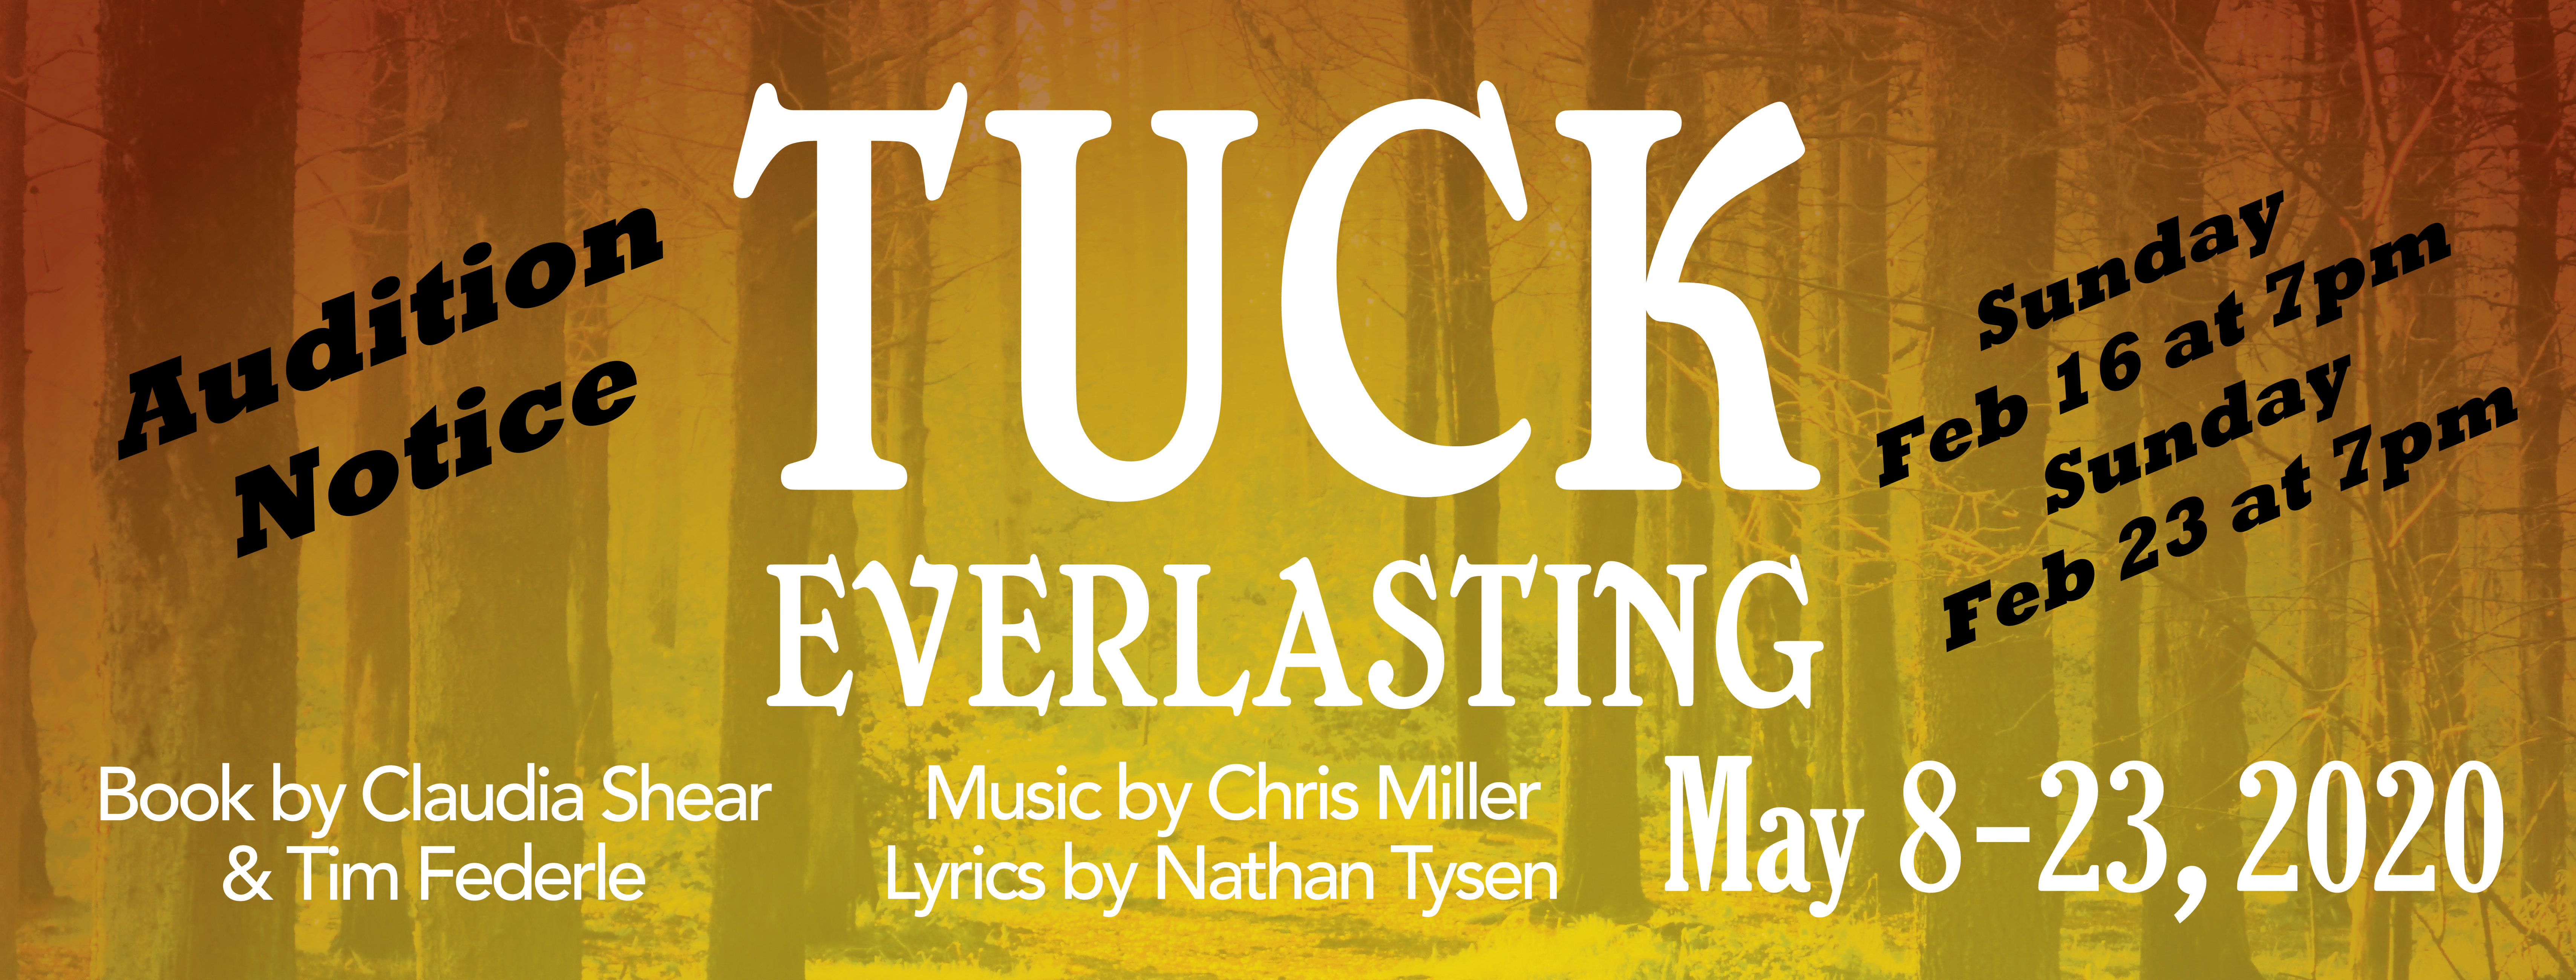 Tuck Everlasting The Musicl Auditions